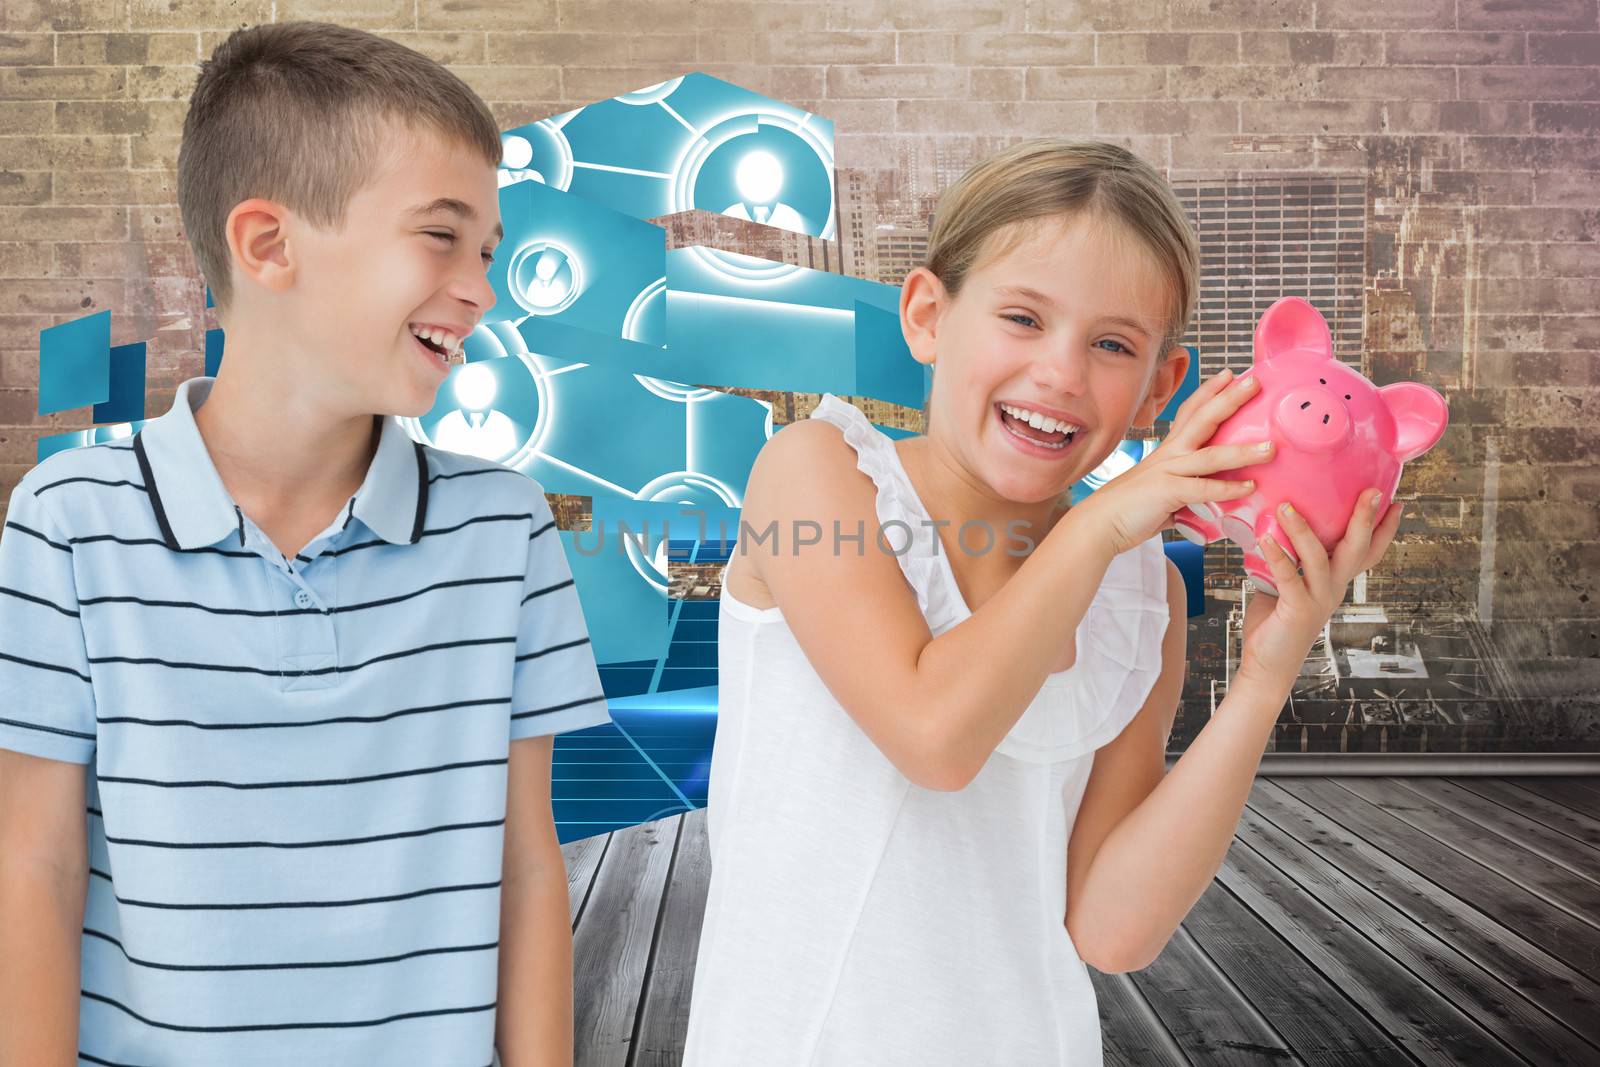 Composite image of smiling young girl holding piggy bank by Wavebreakmedia